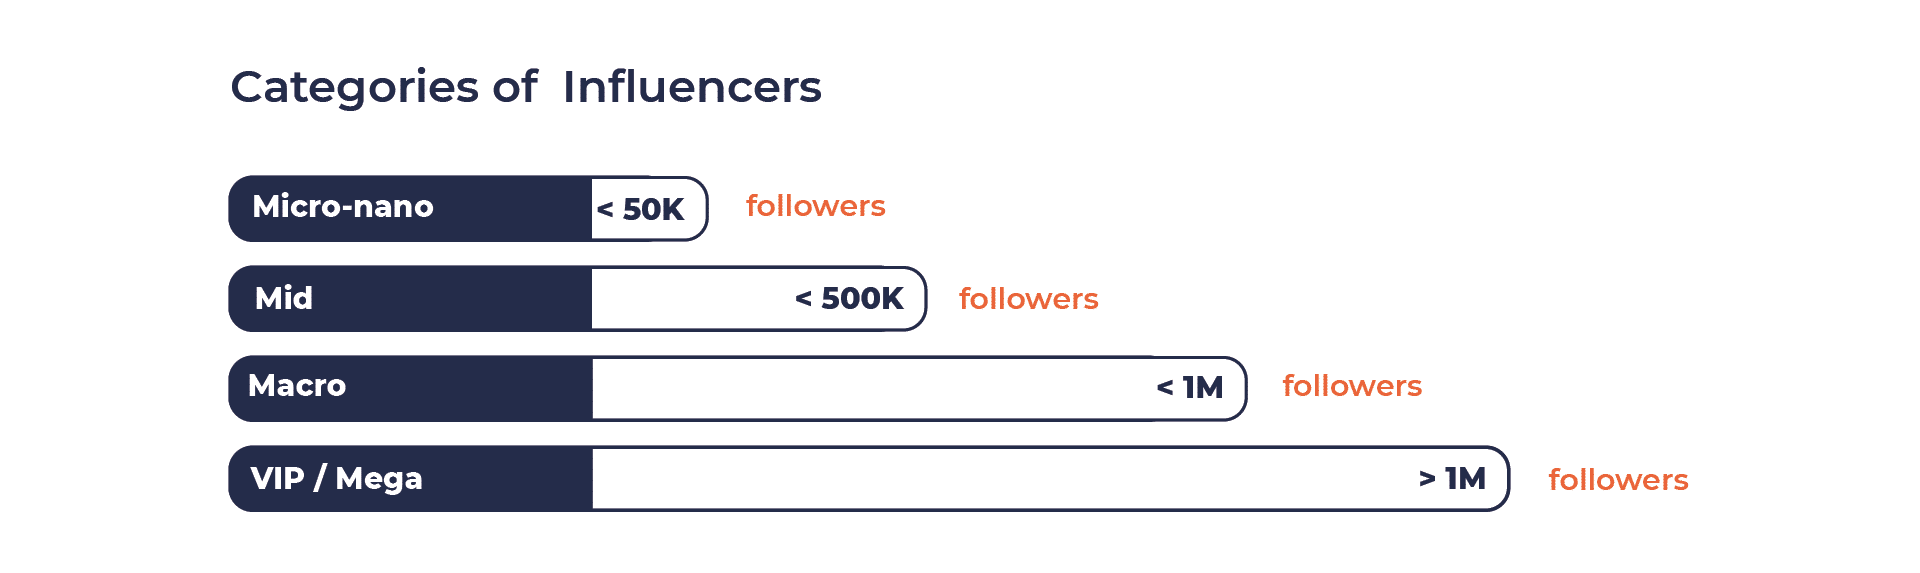 categories of influencers